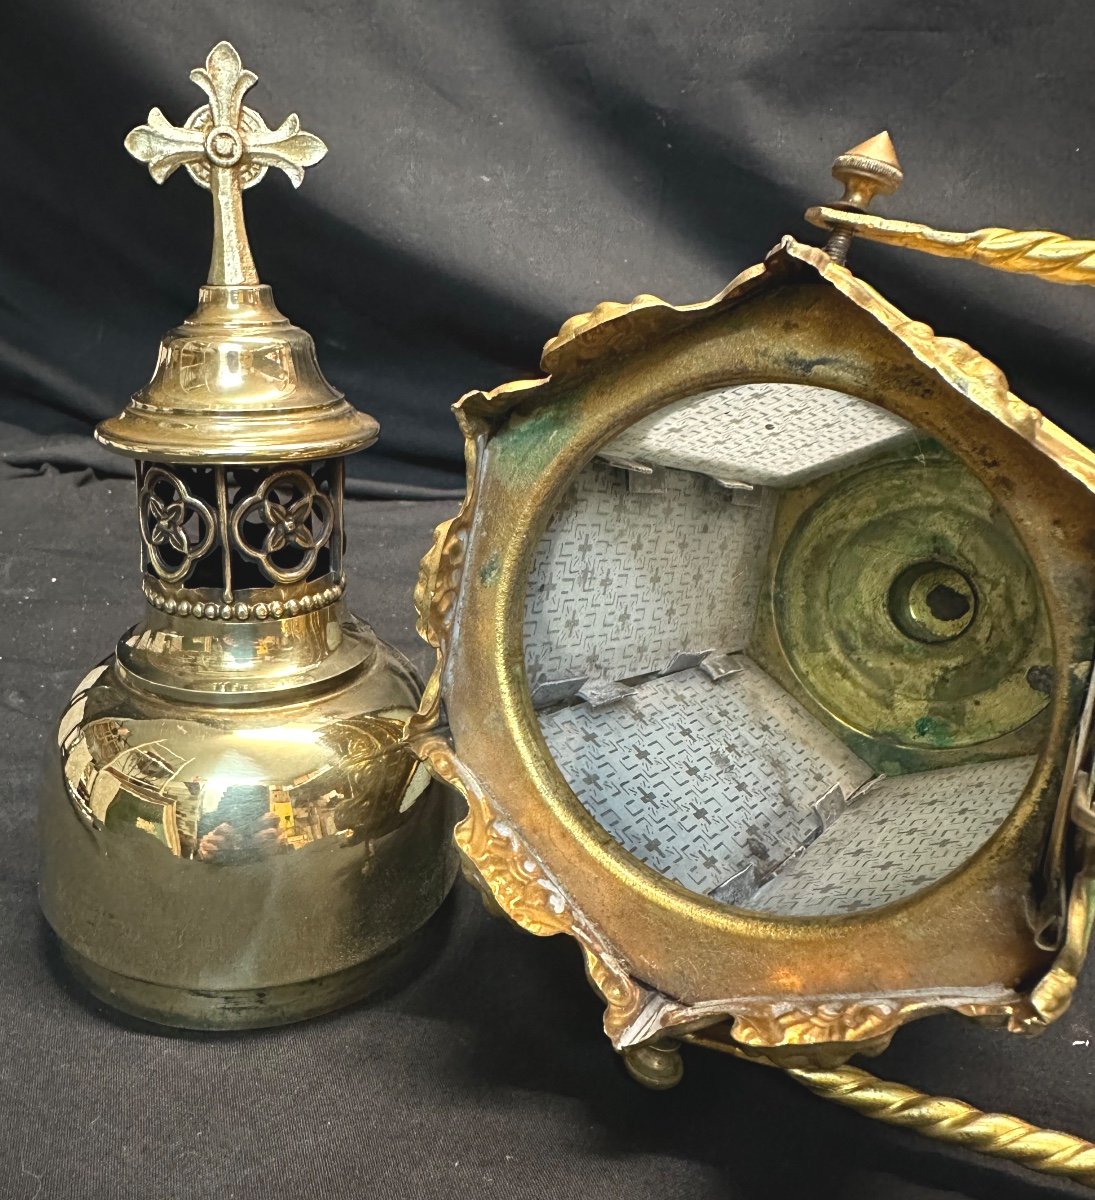 Rare Pair Of 19th Century Procession Lanterns Completed And In Very Good Original Condition-photo-1